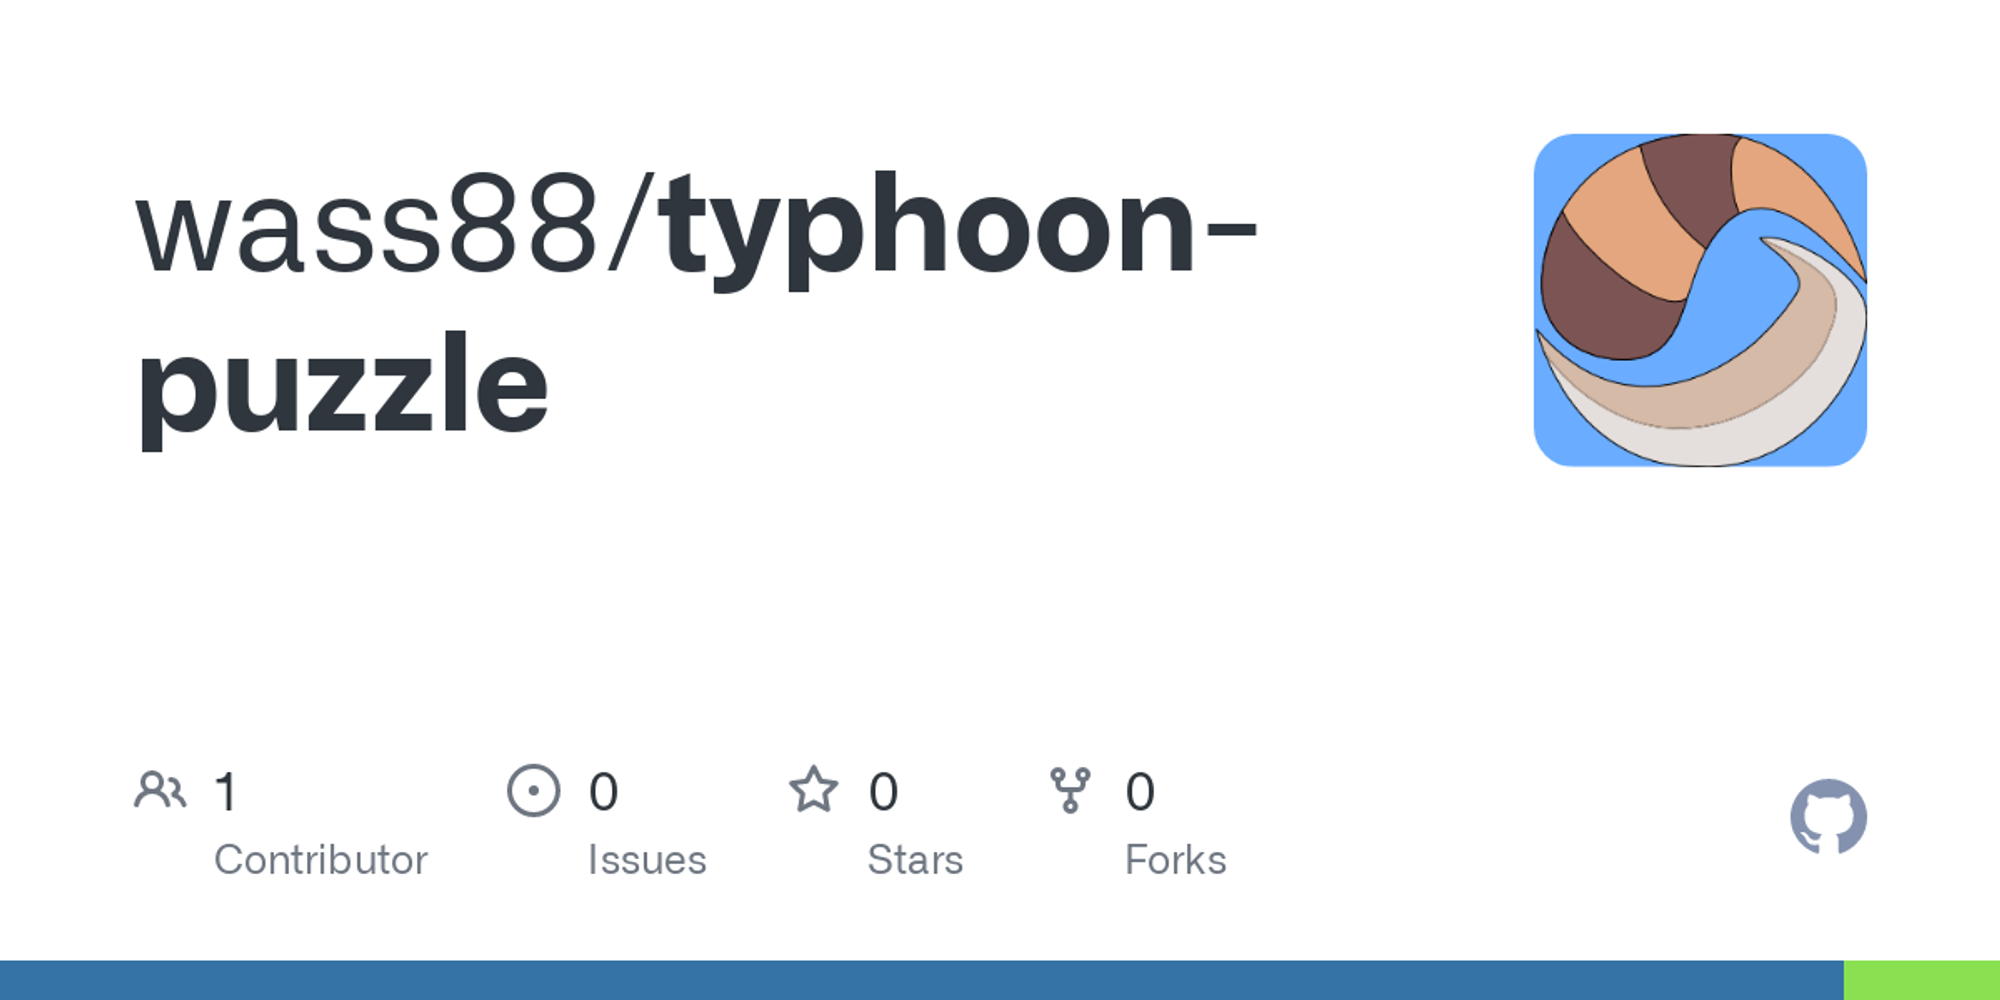 typhoon-puzzle/small.txt.csp at master · wass88/typhoon-puzzle